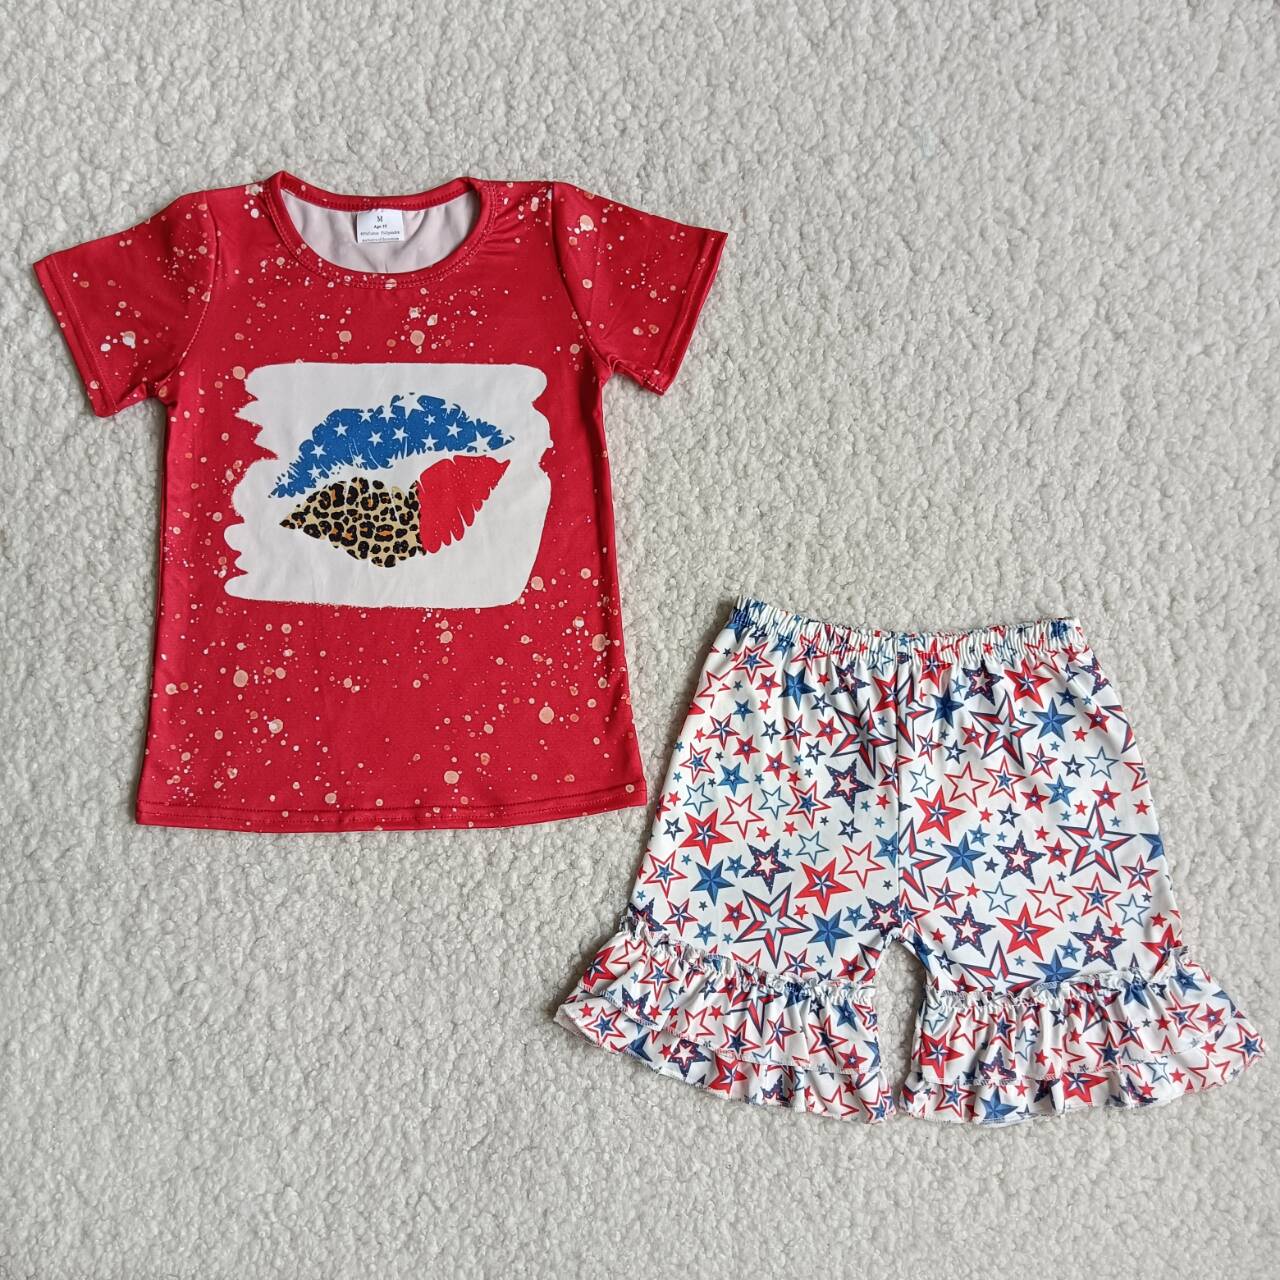 girl short sleeve red top match stars pattern shorts for july 4th